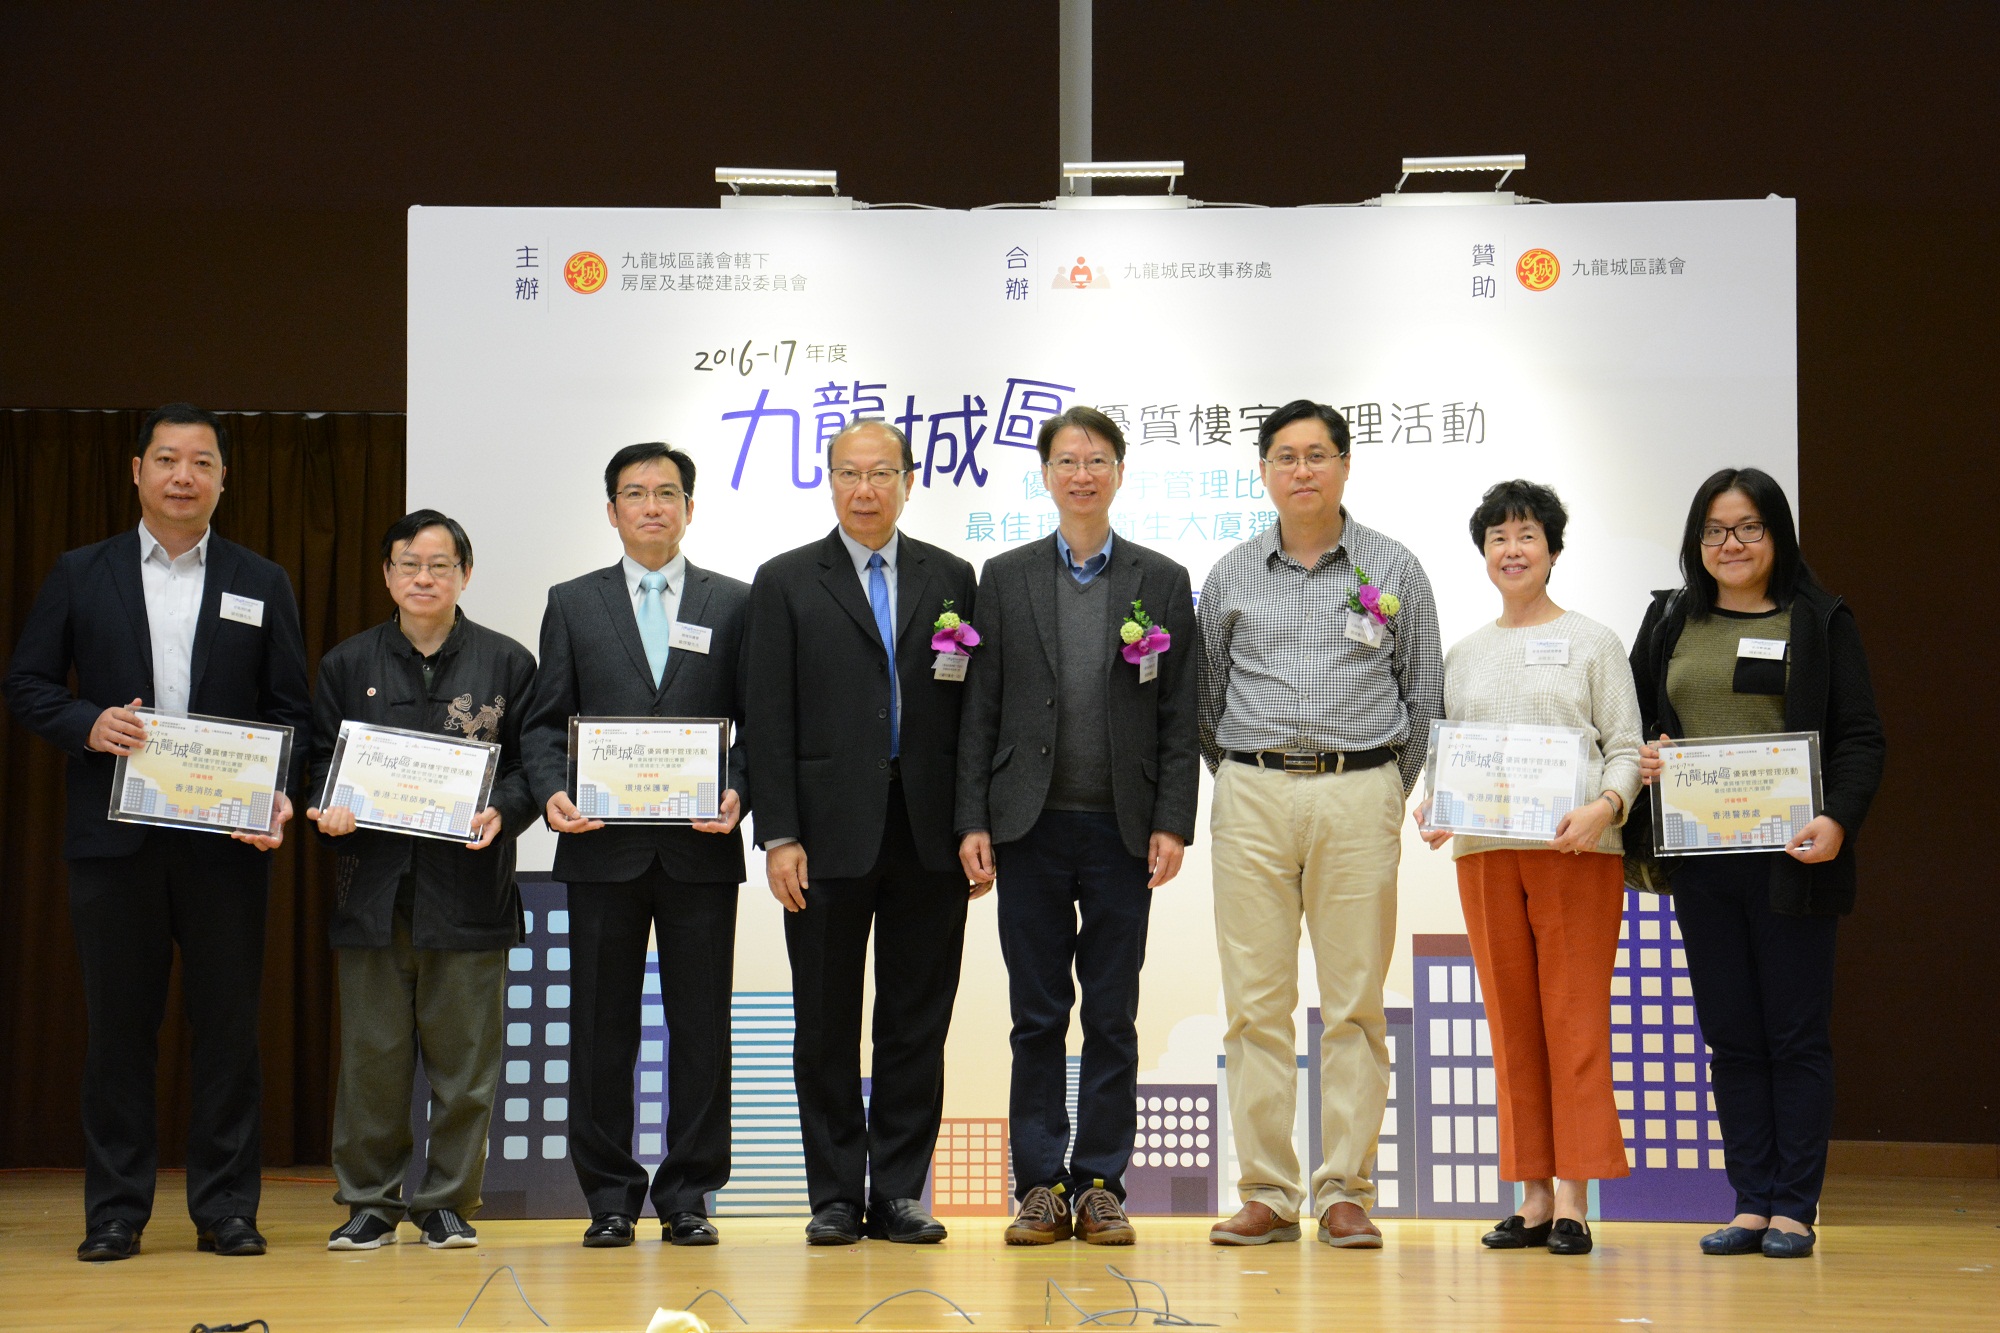 EPD supported Quality Building Management Competitions organized by various District Councils to recognize outstanding green management initiatives of participating buildings.